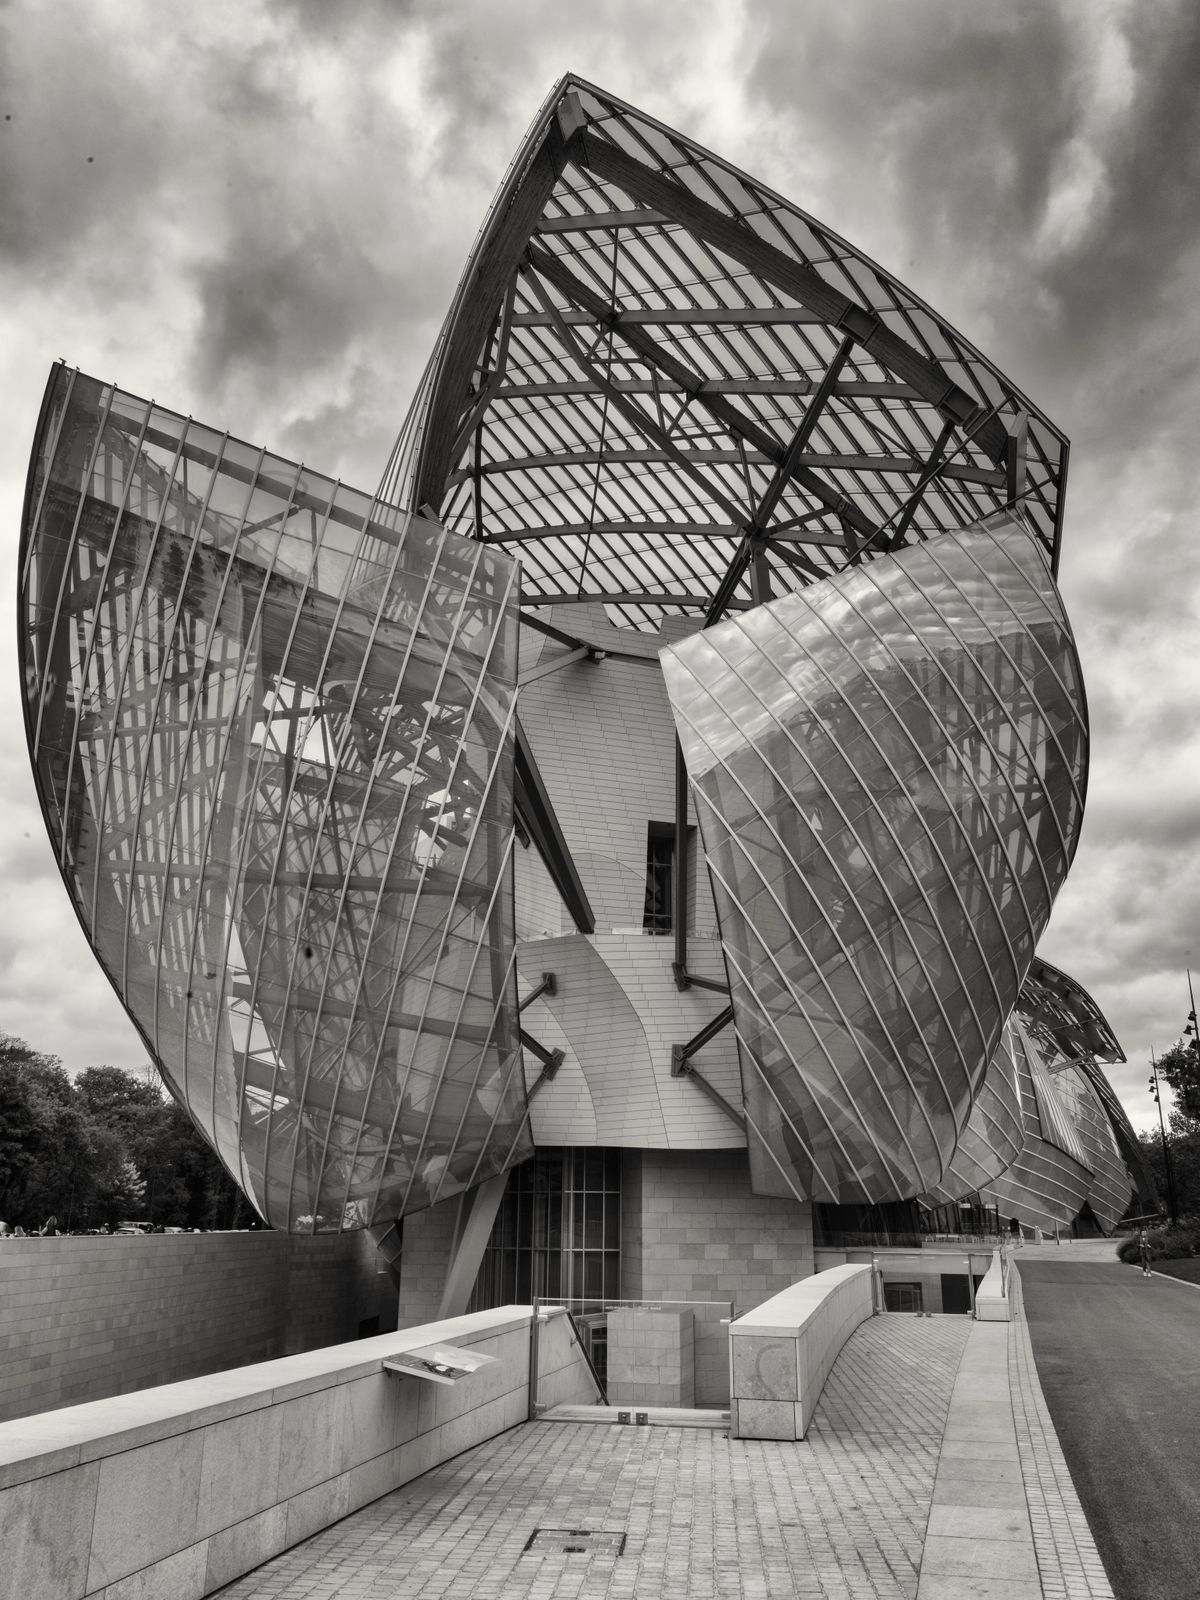 Louis Vuitton Foundation-Frank Gehry, Paris .  Image by William Curtis Rolf